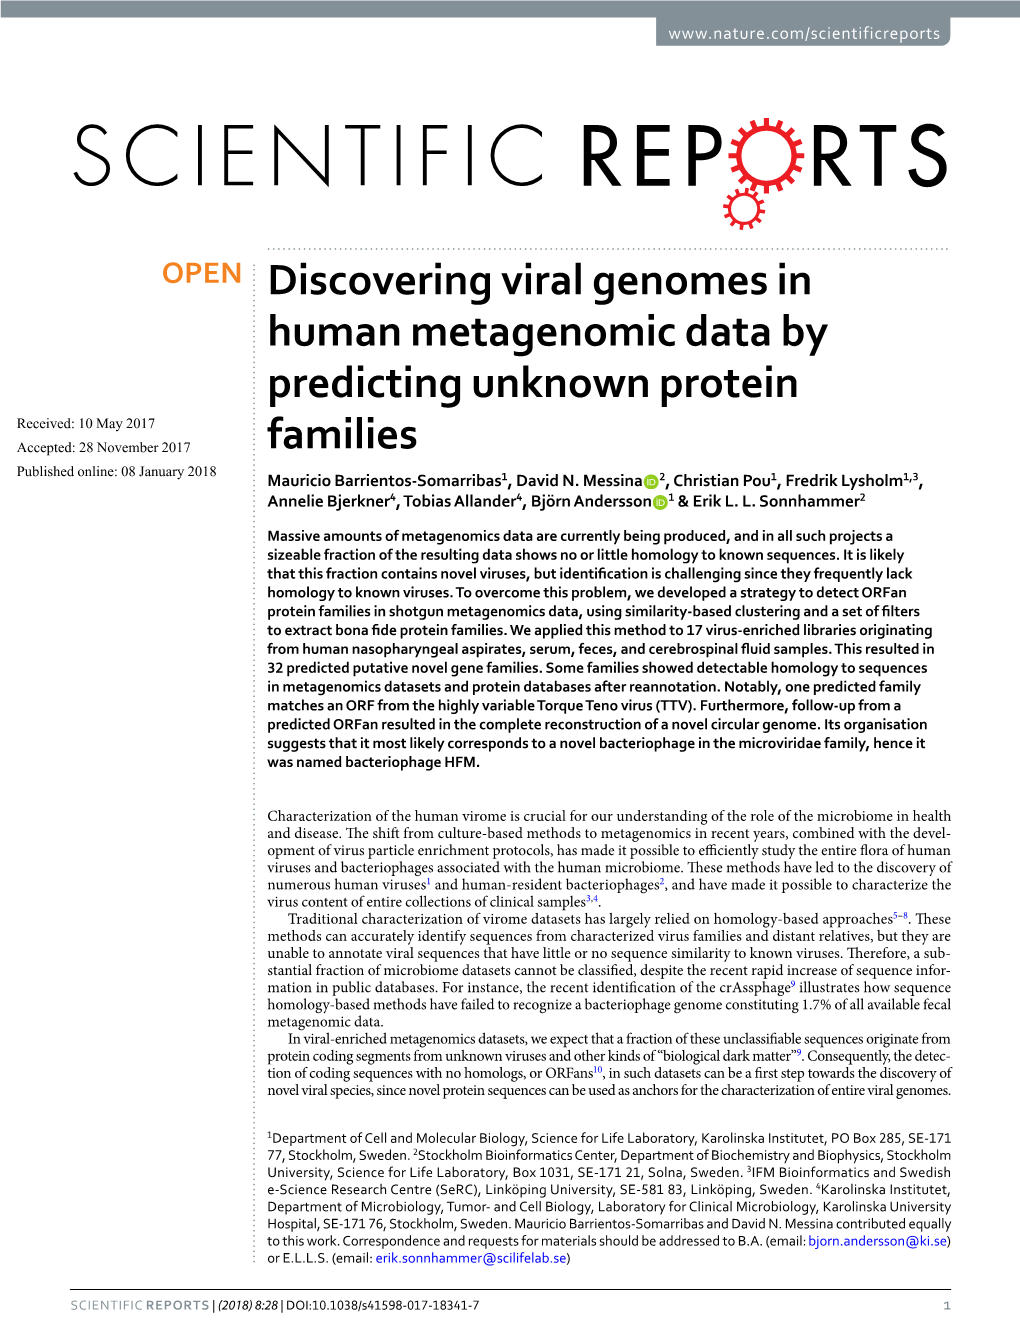 Discovering Viral Genomes in Human Metagenomic Data by Predicting